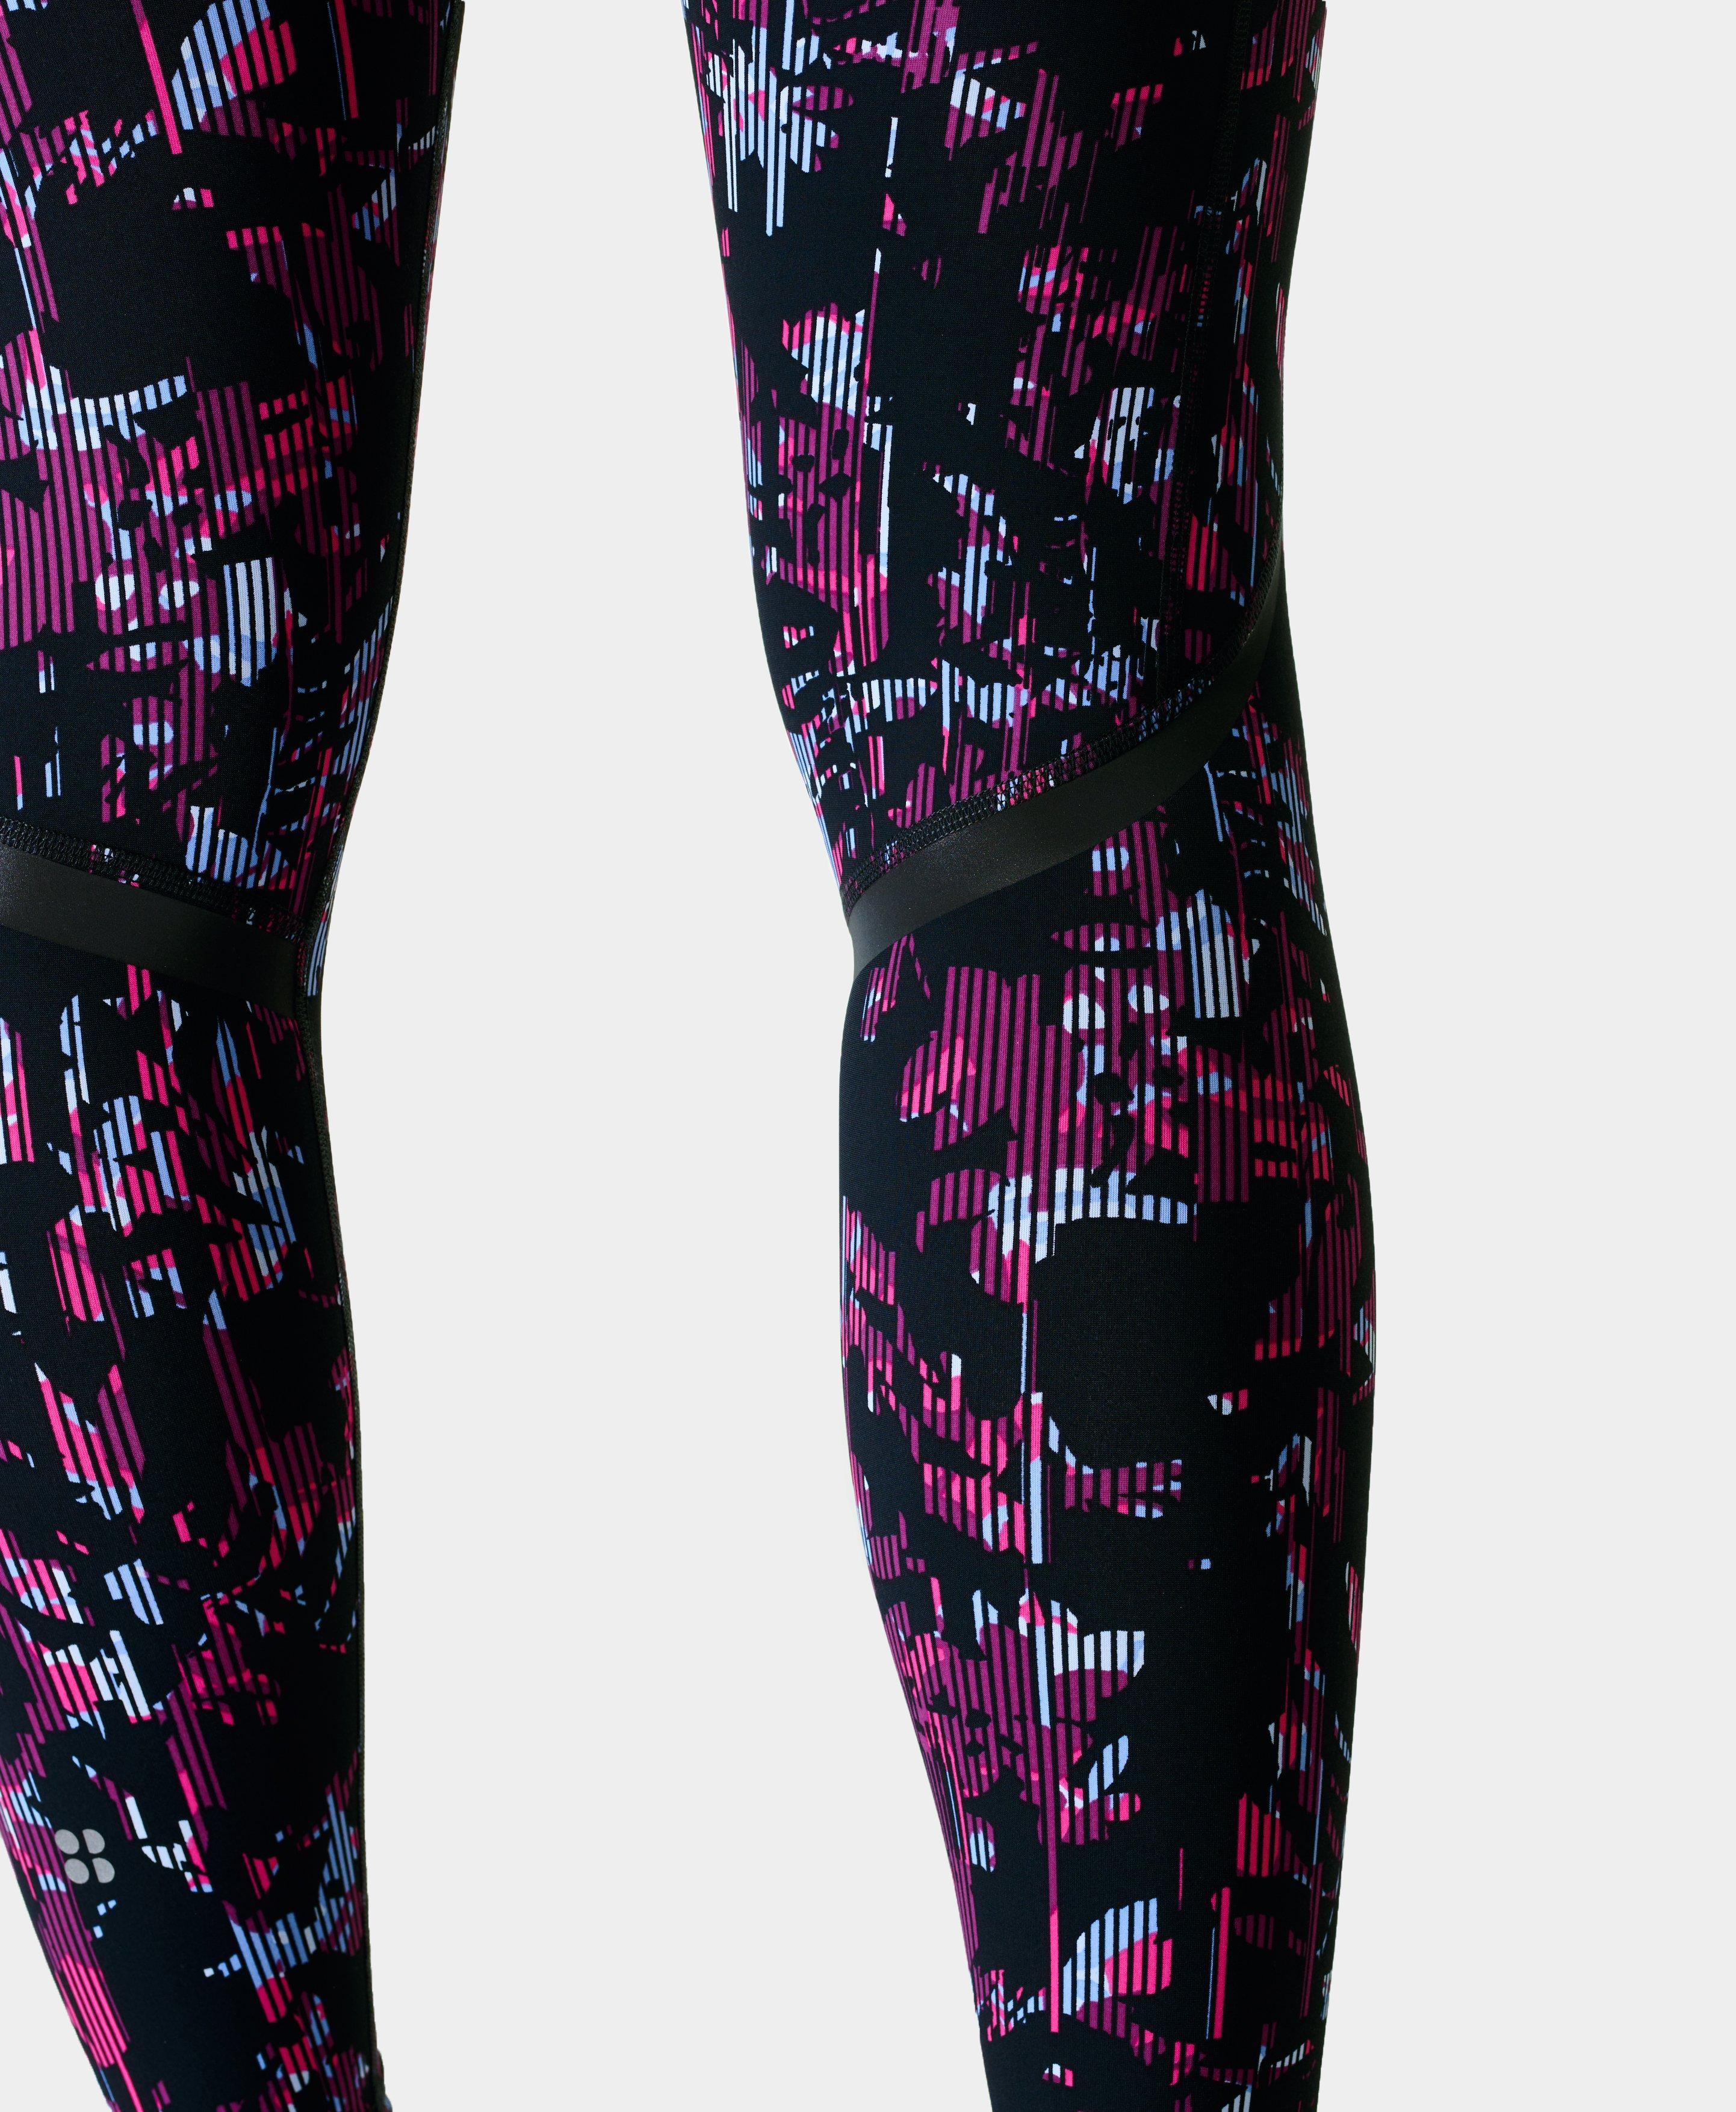 Zero Gravity High-Waisted Running Tight - Pink Floral Glitch Print, Women's  Leggings